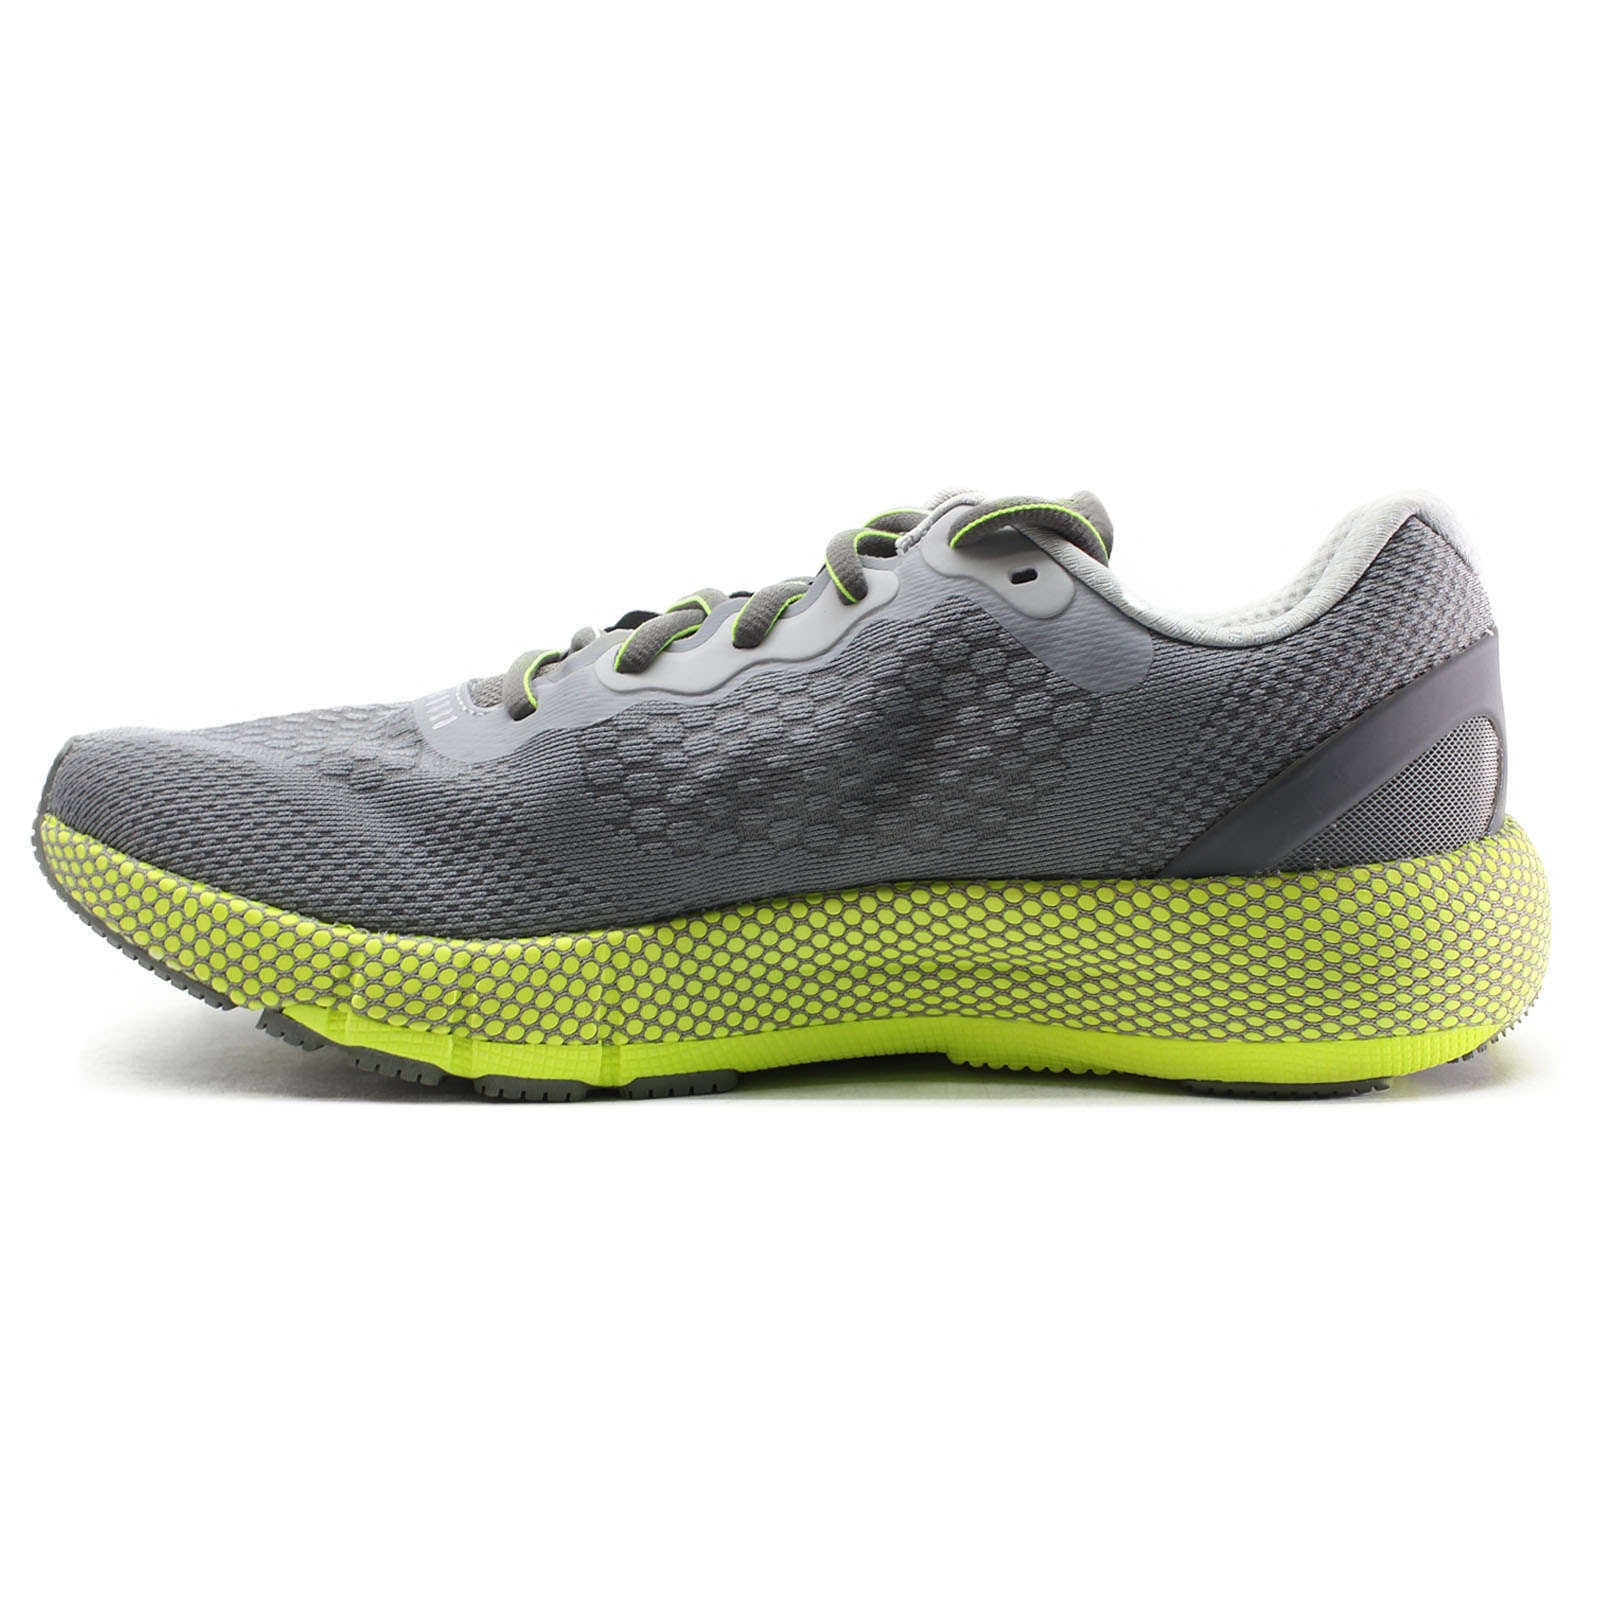 Under Armour HOVR Machina 2 Synthetic Textile Men's Low-Top Trainers#color_grey yellow